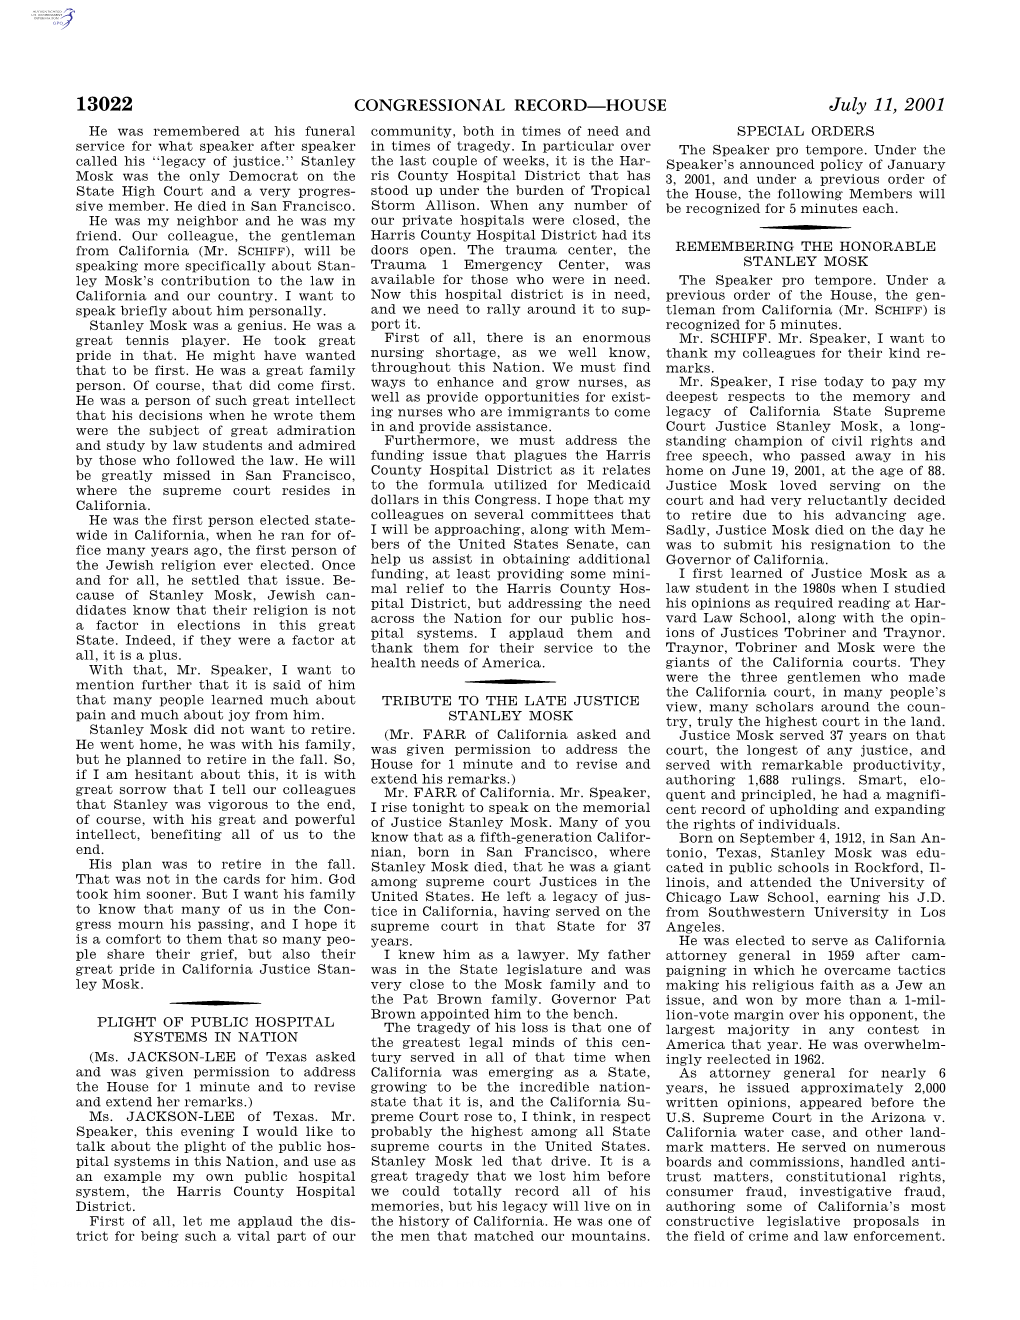 CONGRESSIONAL RECORD—HOUSE July 11, 2001